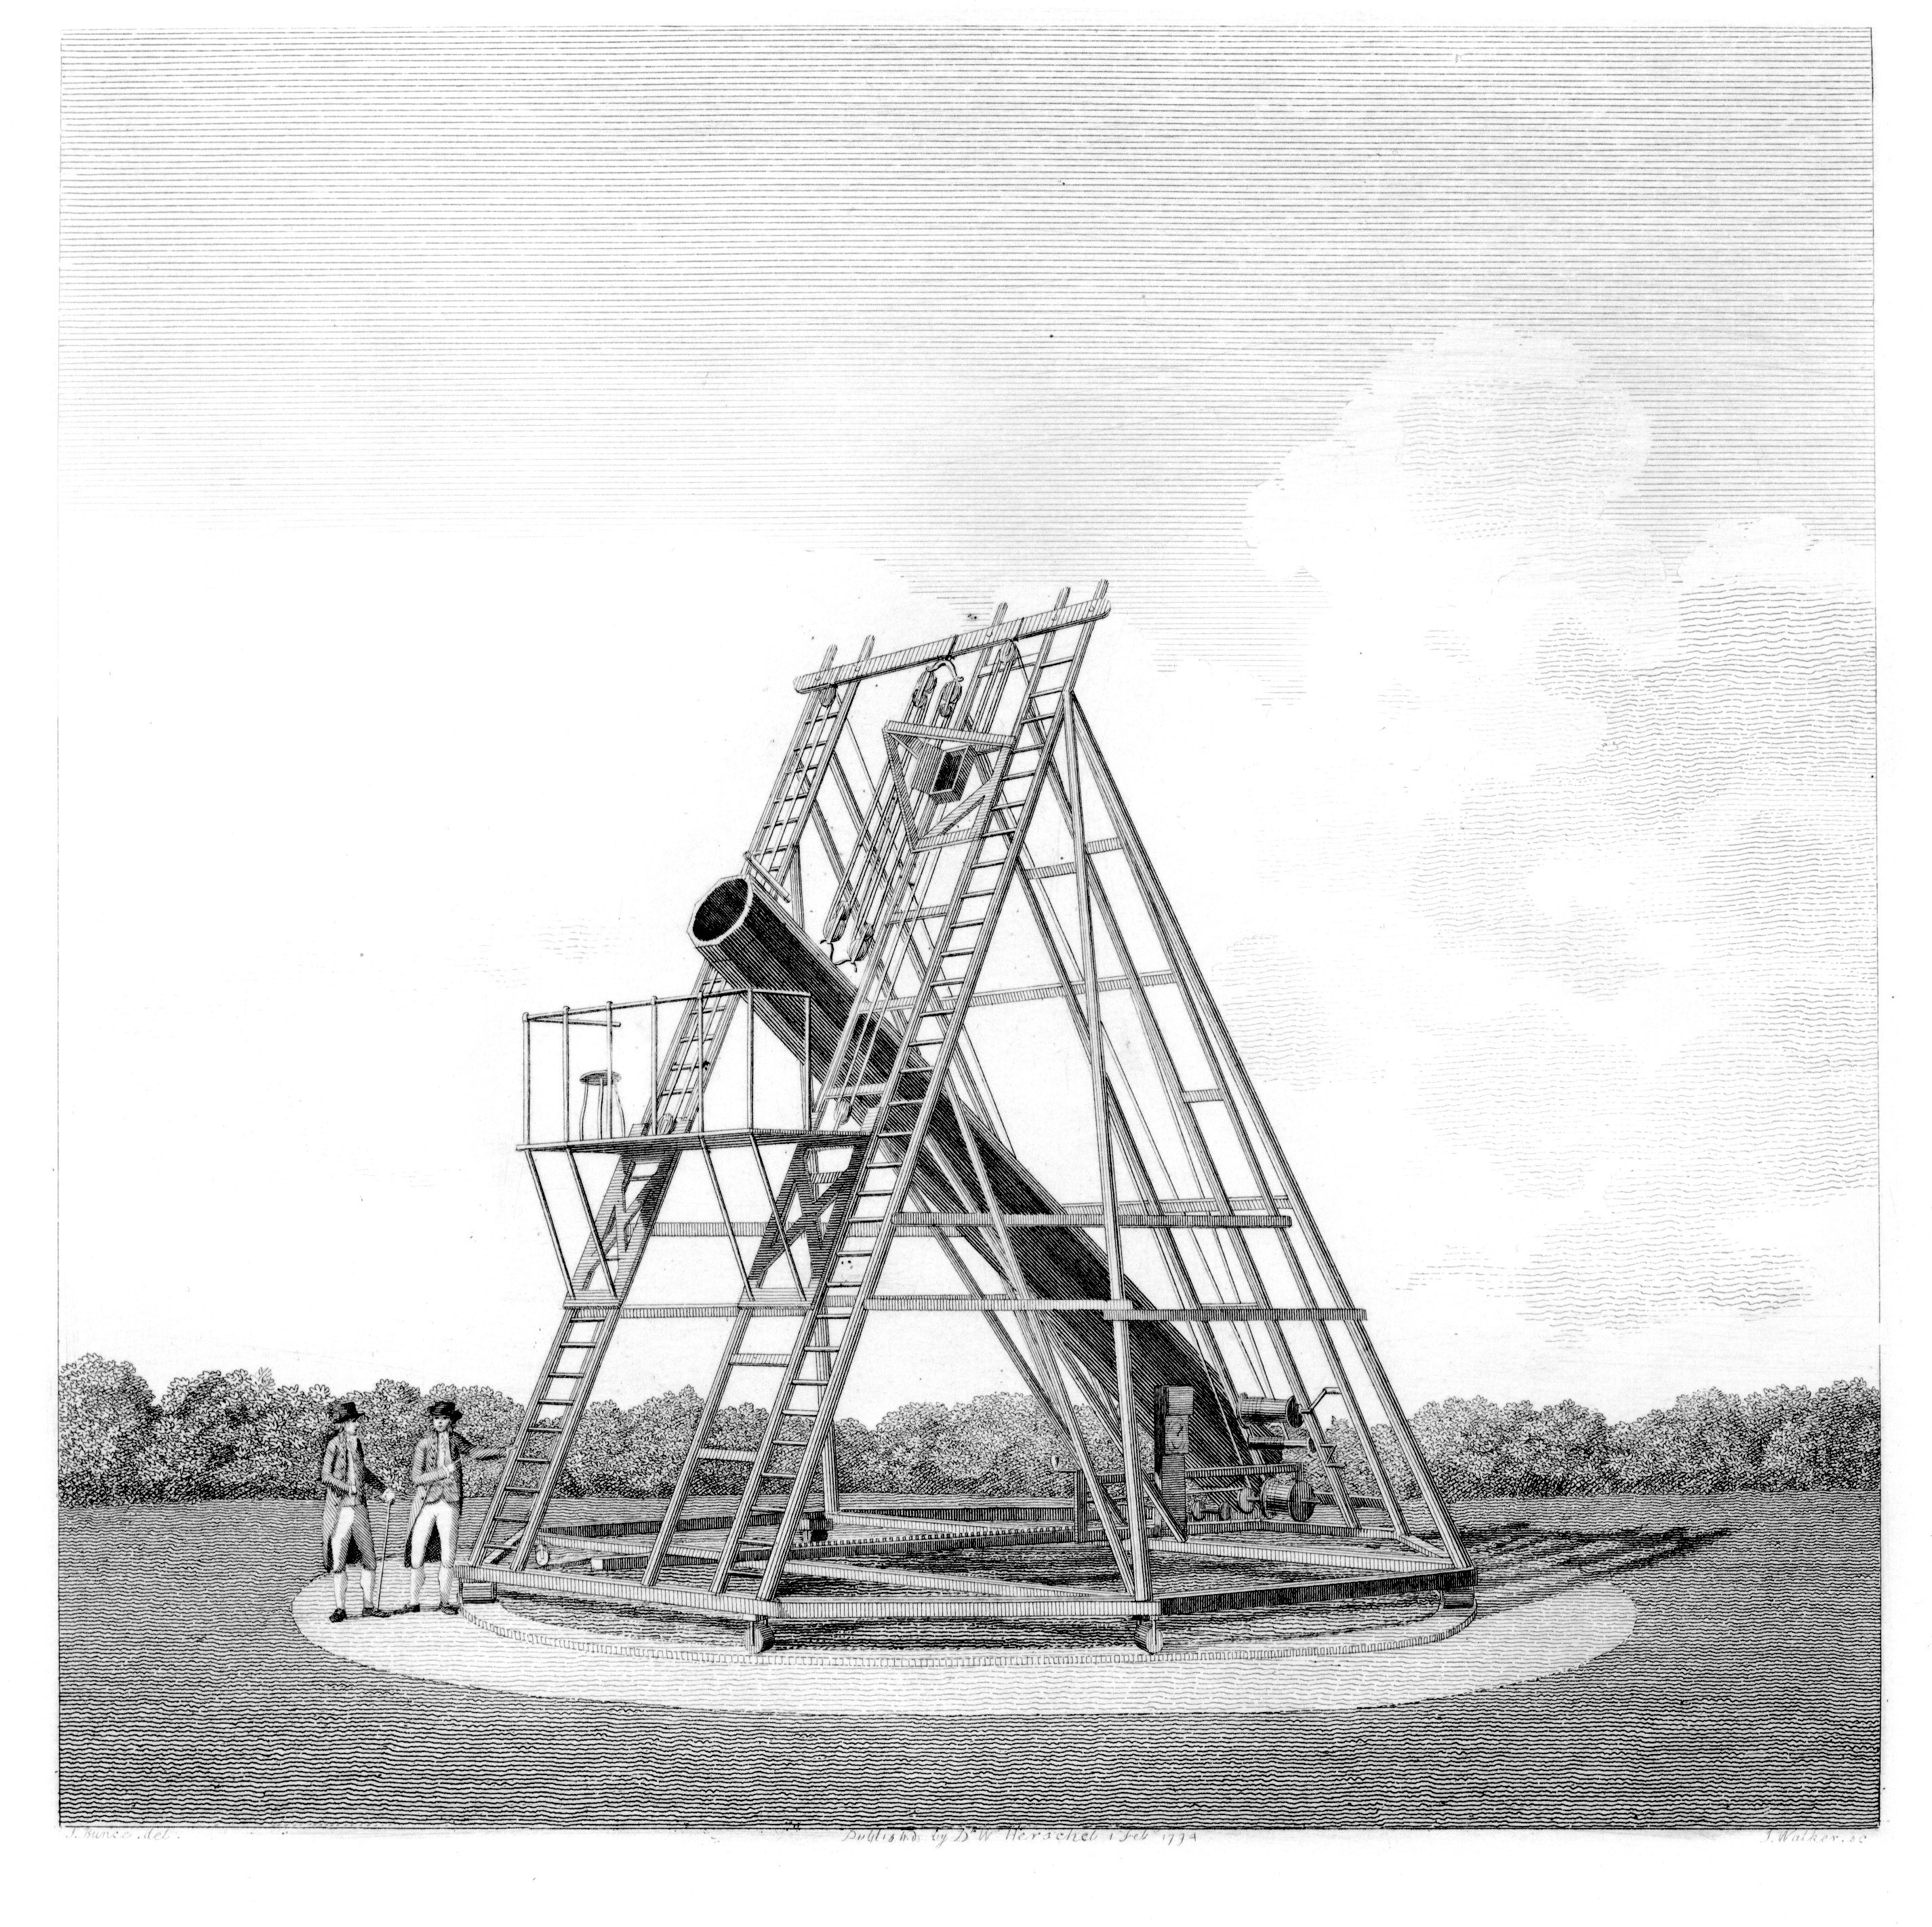 Black and white print of Herschel's twenty-foot reflecting telescope, 1794. Two men stand to the left of the apparatus, which is a large A-frame supporting a diagonal cylinder.